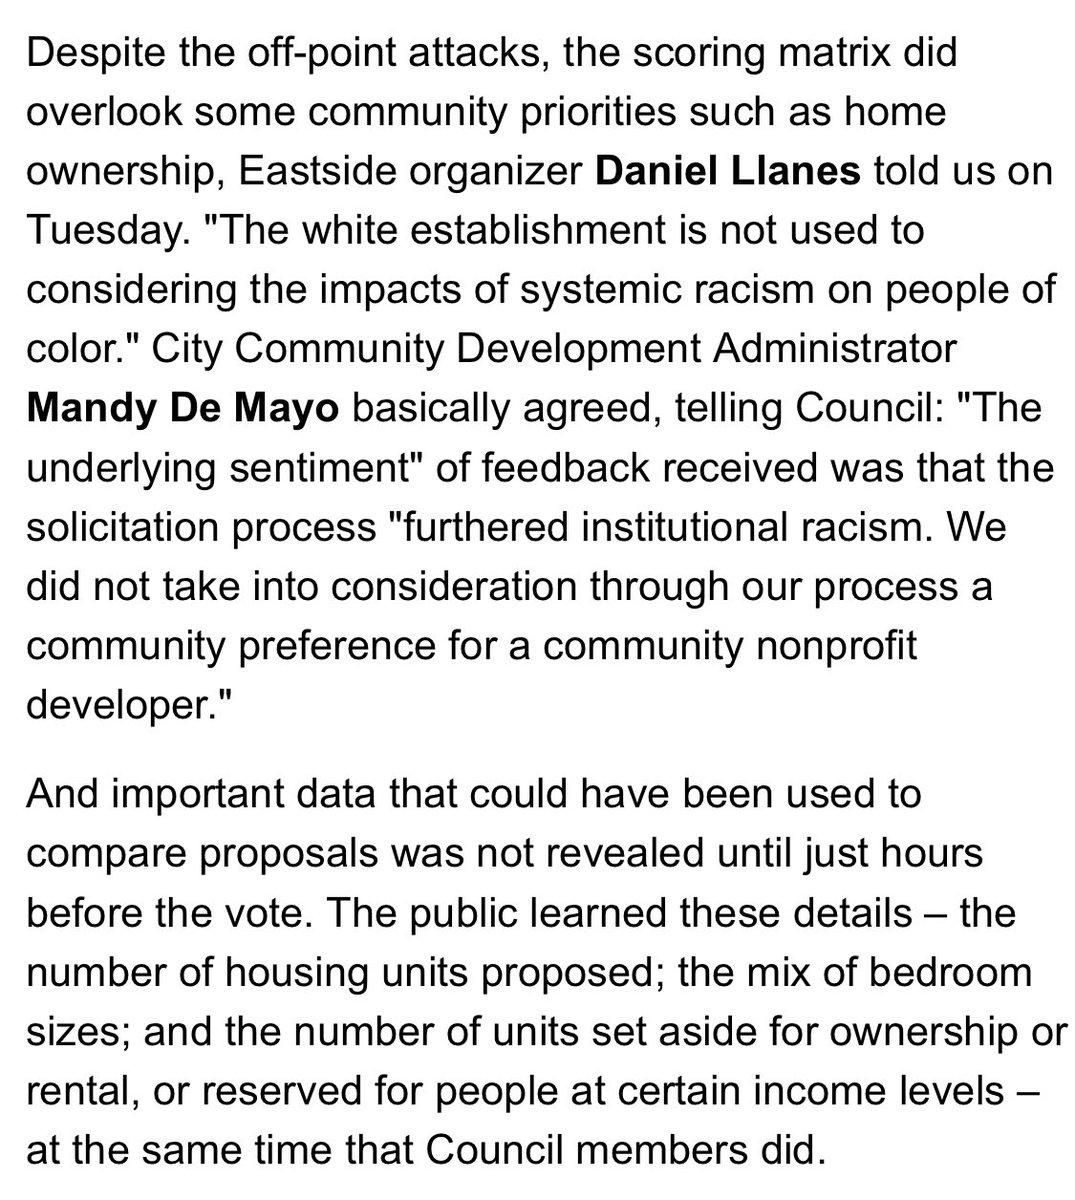 But staff admits to mishandling parts of the solicitation process — their first time for AHFC sites reserved for affordable housing. At one point, a housing dept staffer basically agreed with organizers that the process unintentionally contributed to systemic racism.